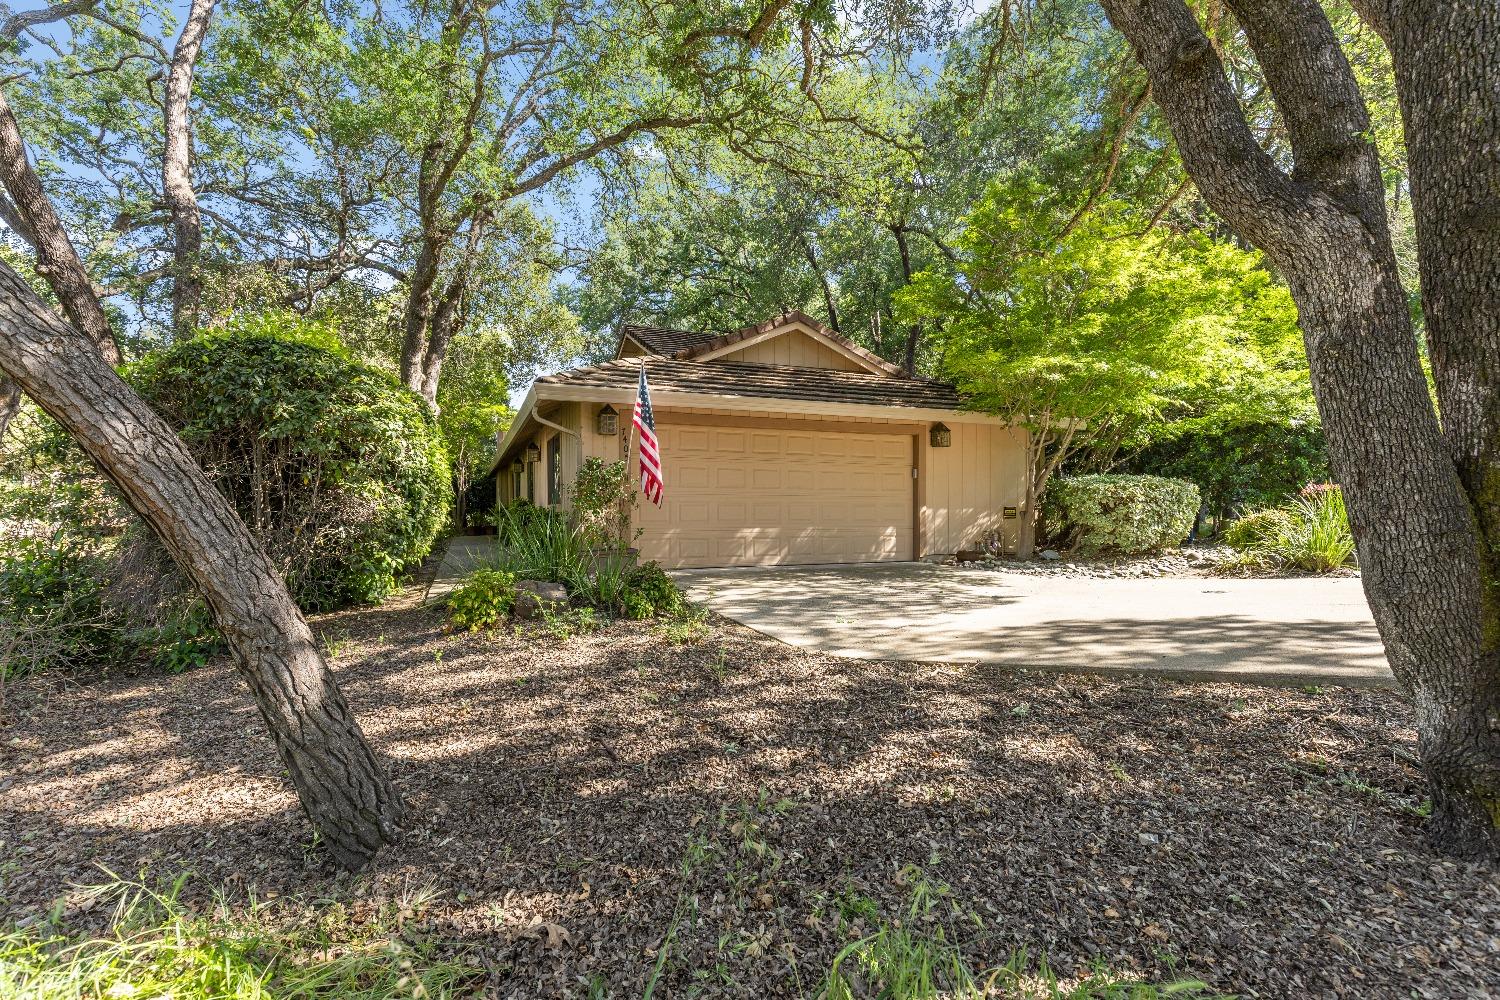 Photo of 7405 Black Tree Ln in Citrus Heights, CA